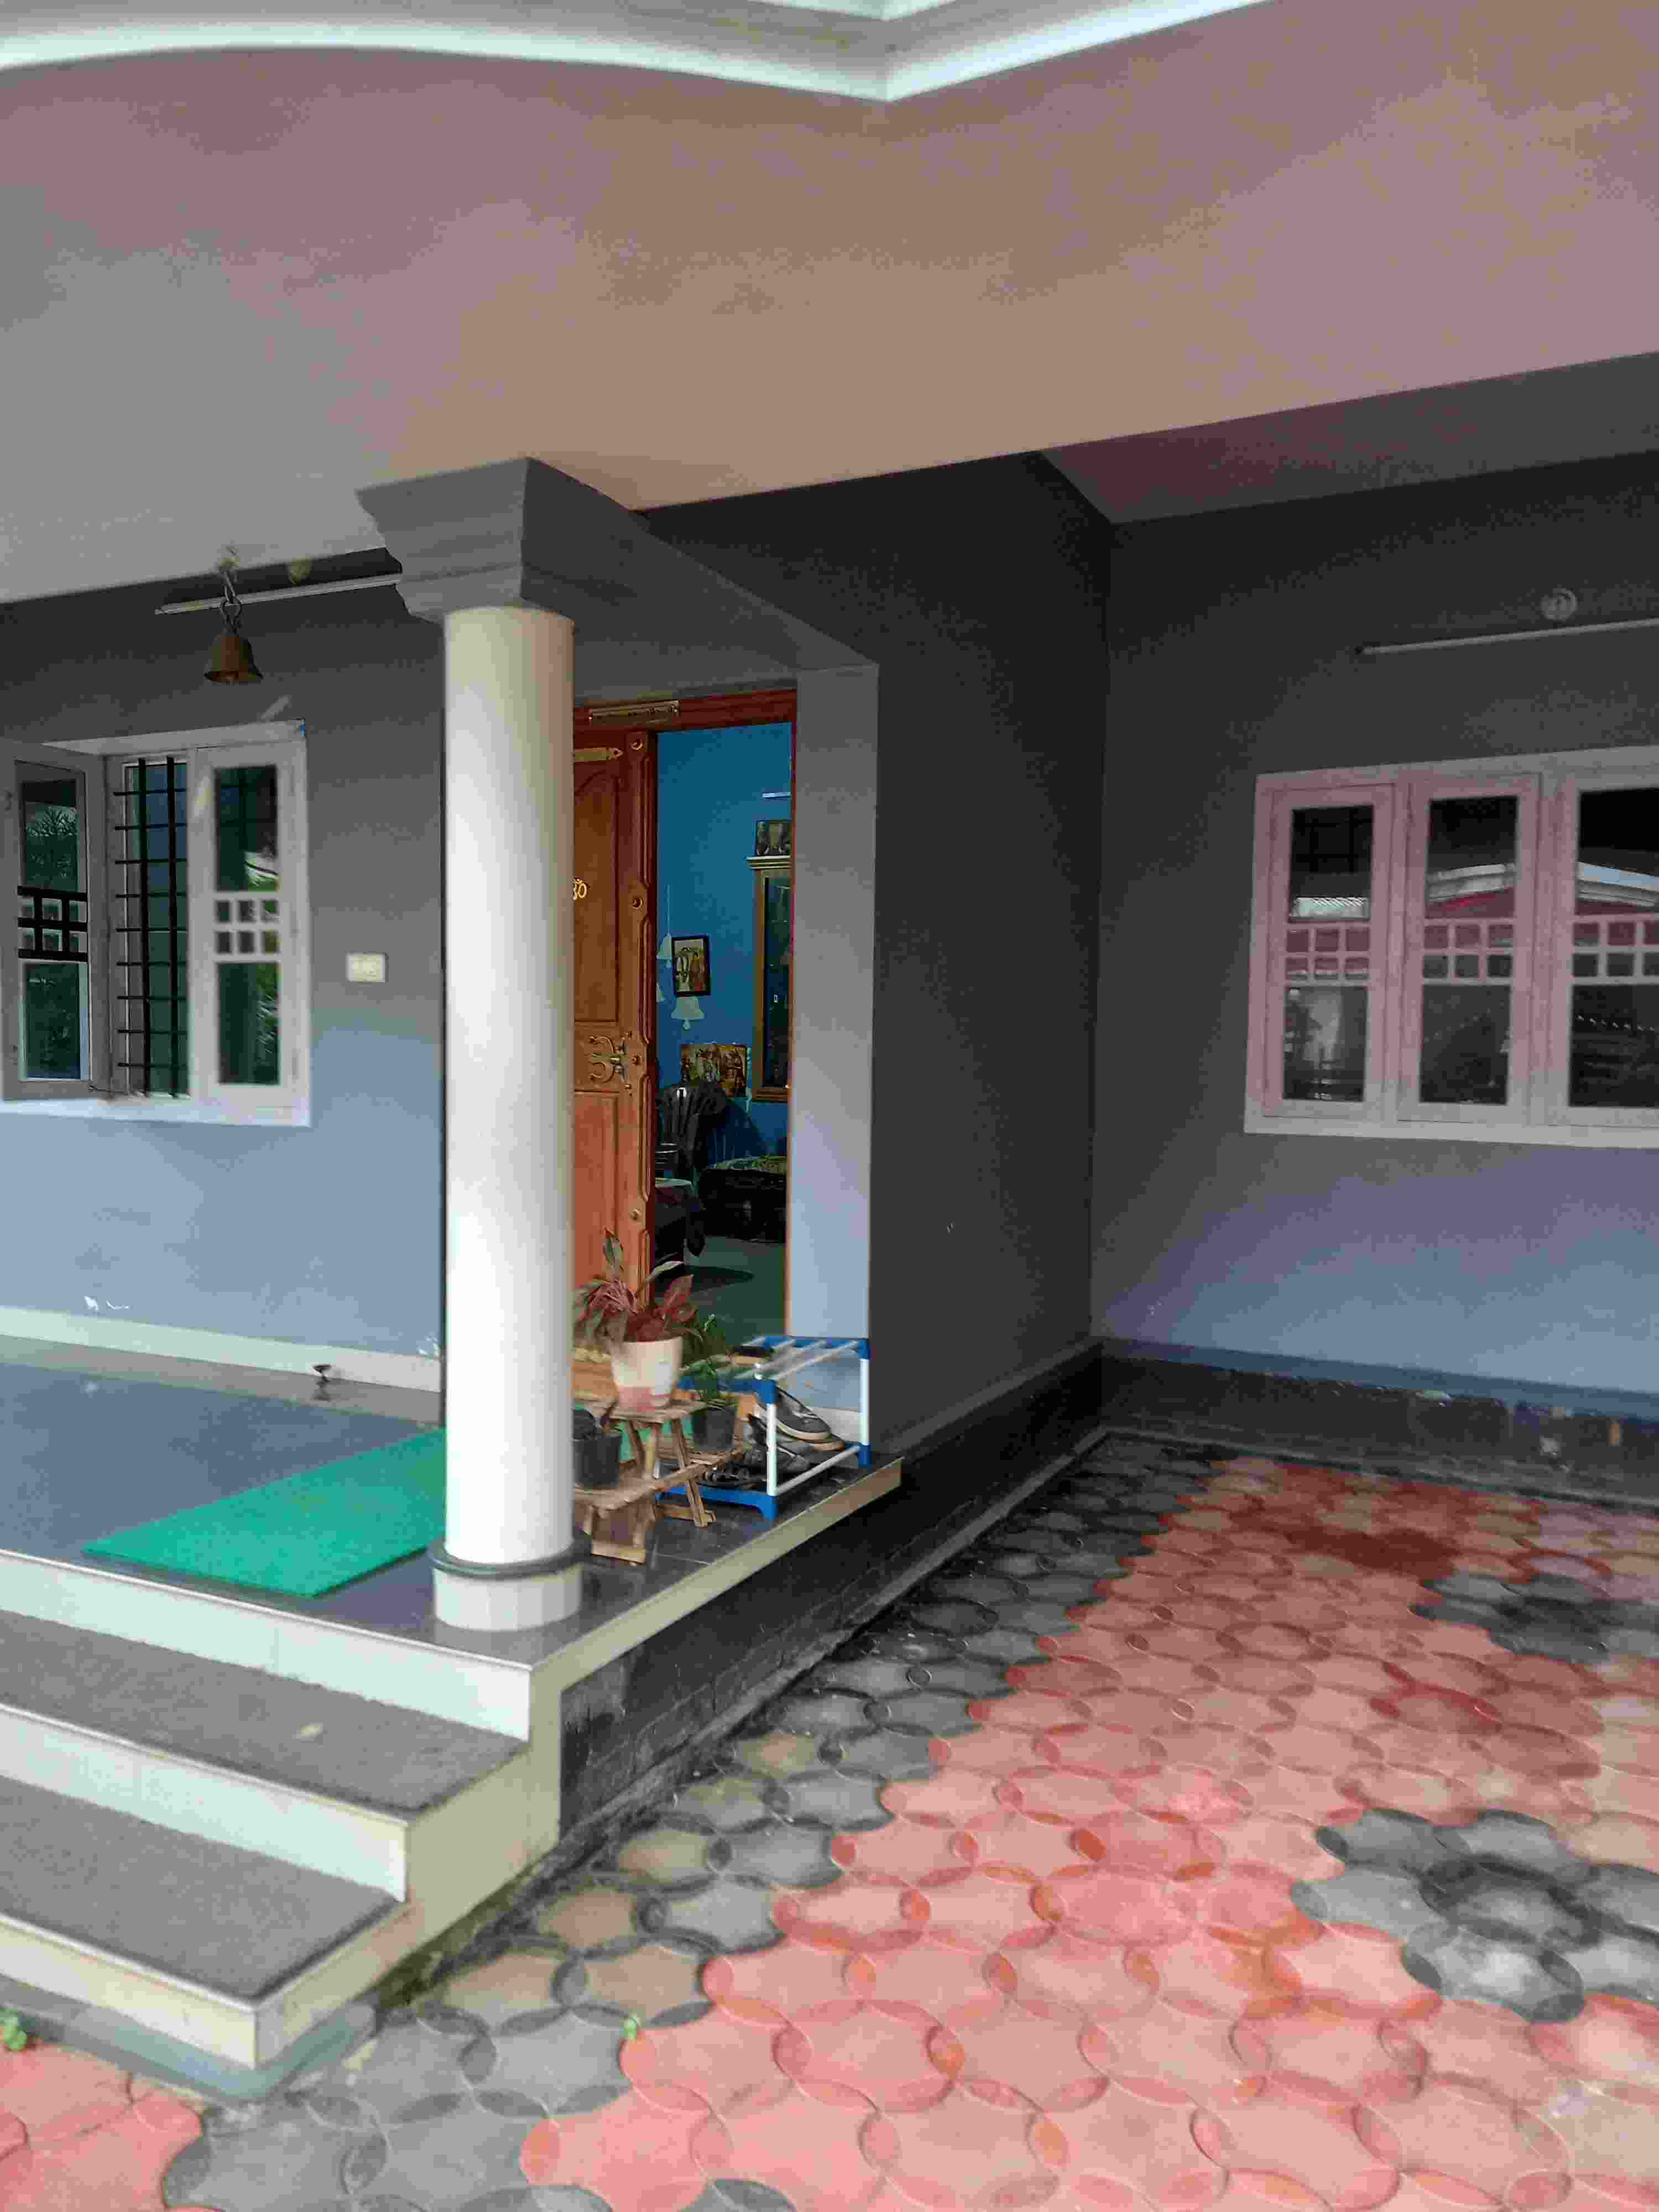 Independent House for Rent 1500 Sq. Feet at Thrissur